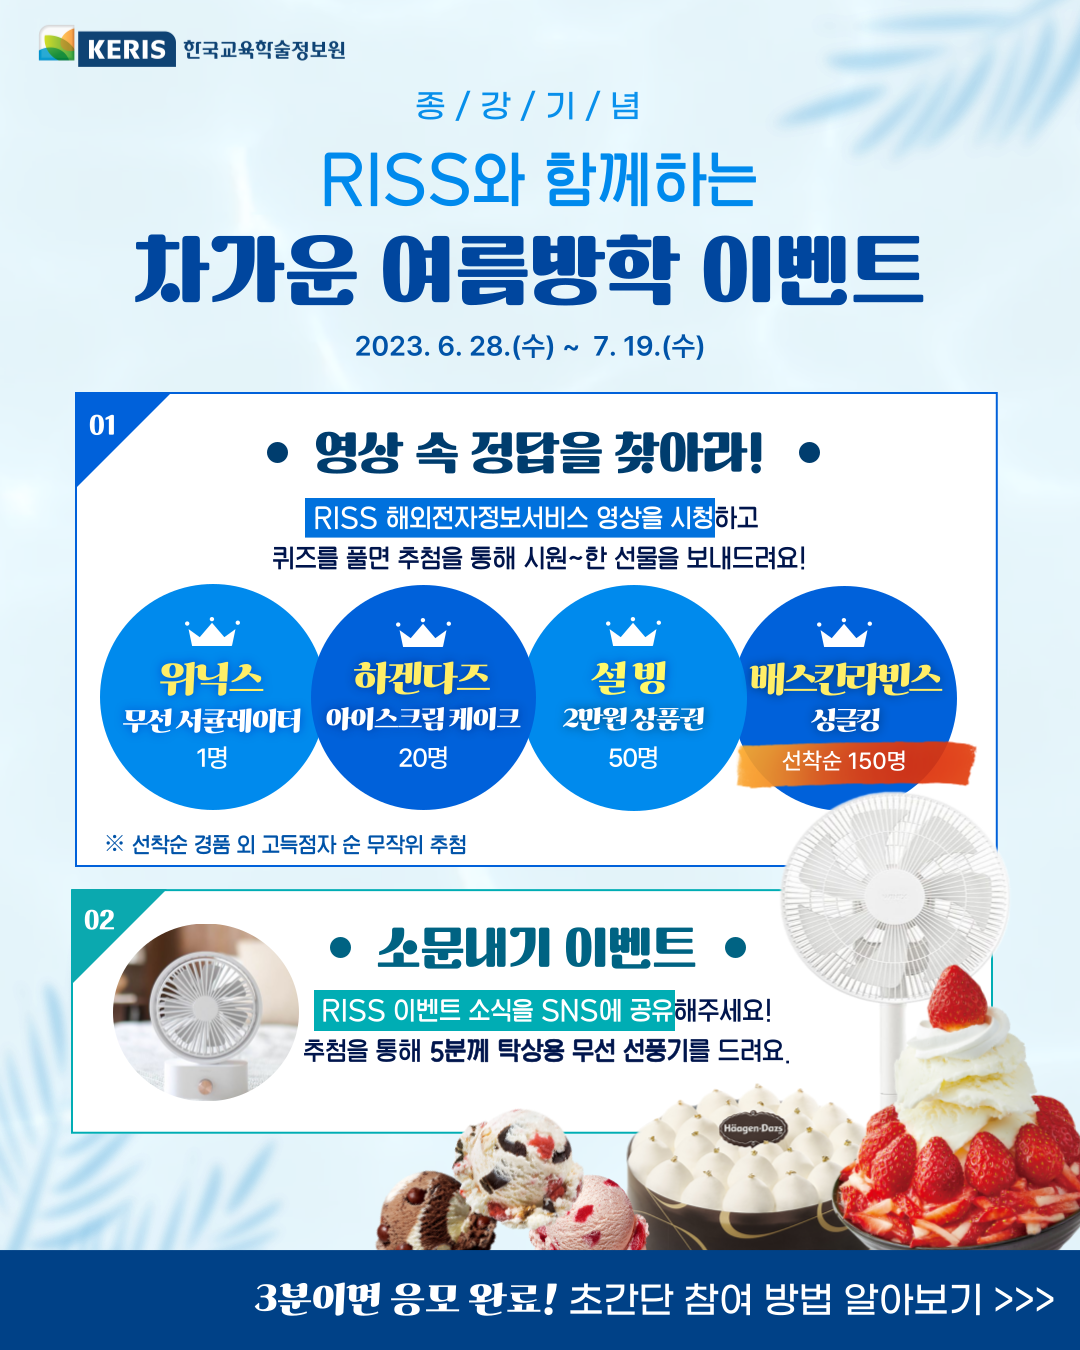 riss event 1_20230628